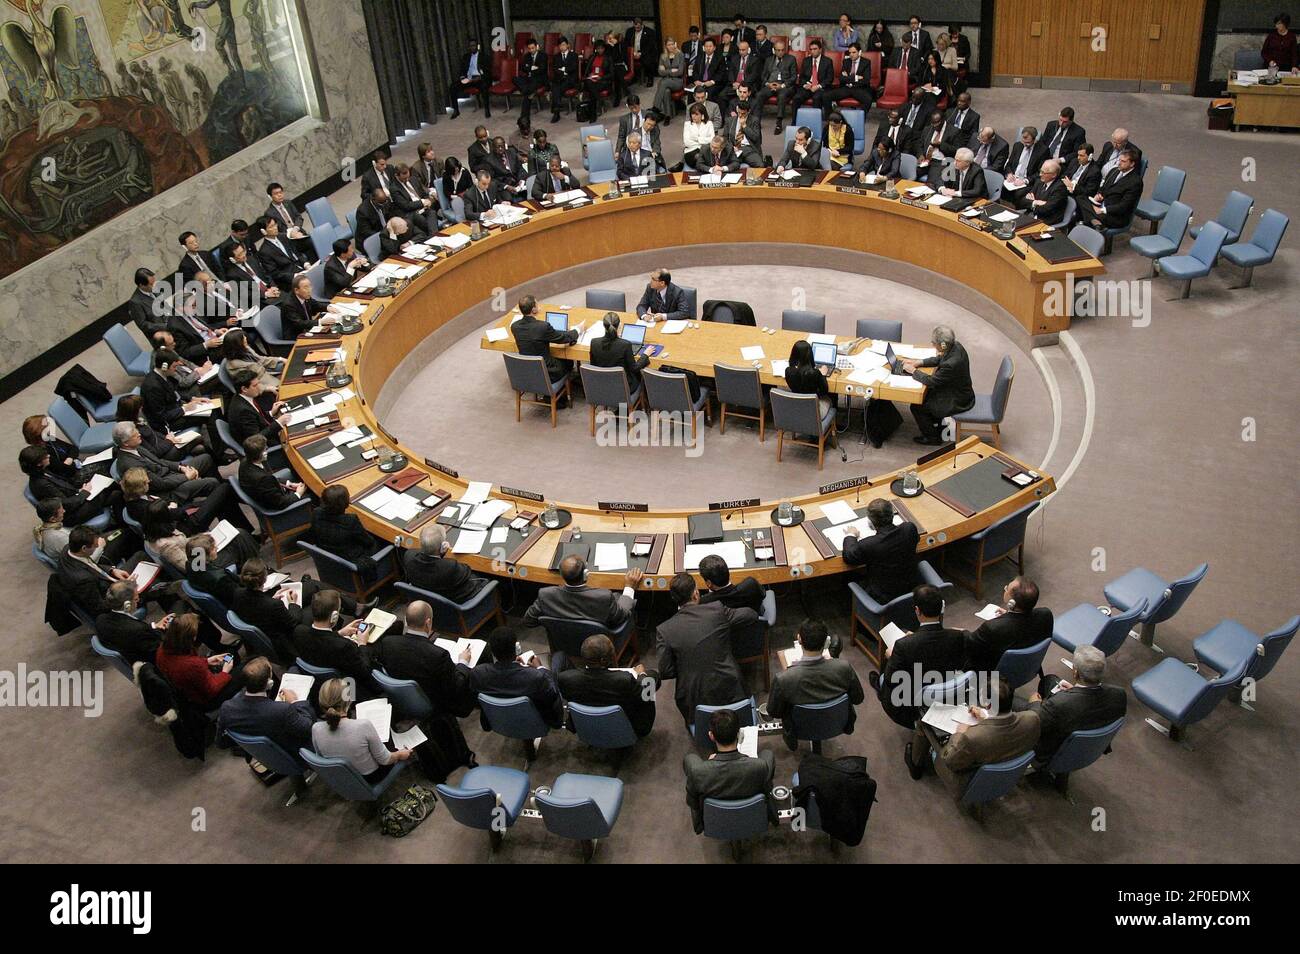 6 January 2010 - New York, NY - A wide view of the Security Council as it deliberates on the situation in Afghanistan. Photo Credit: Paulo Filgueiras/UN Photo/Sipa Press/1001071701 Stock Photo